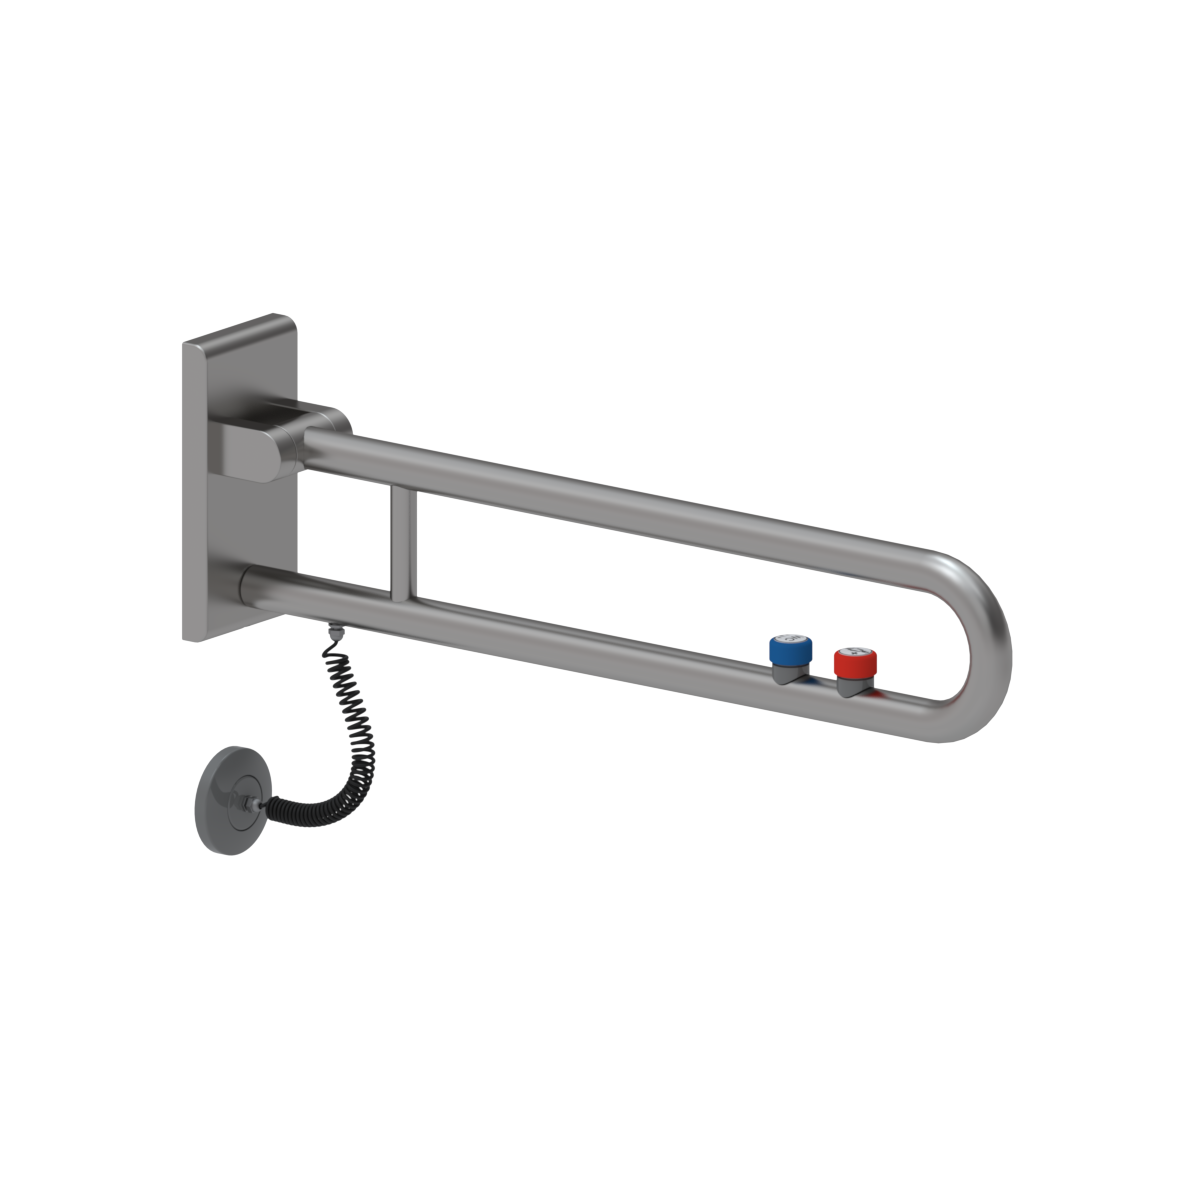 Inox Care Lift-up support rail vario, without base plate, with 2 E-buttons (WC and call: NOC (both)), left and right, L = 725 mm, connection covered with rose, Stainless steel